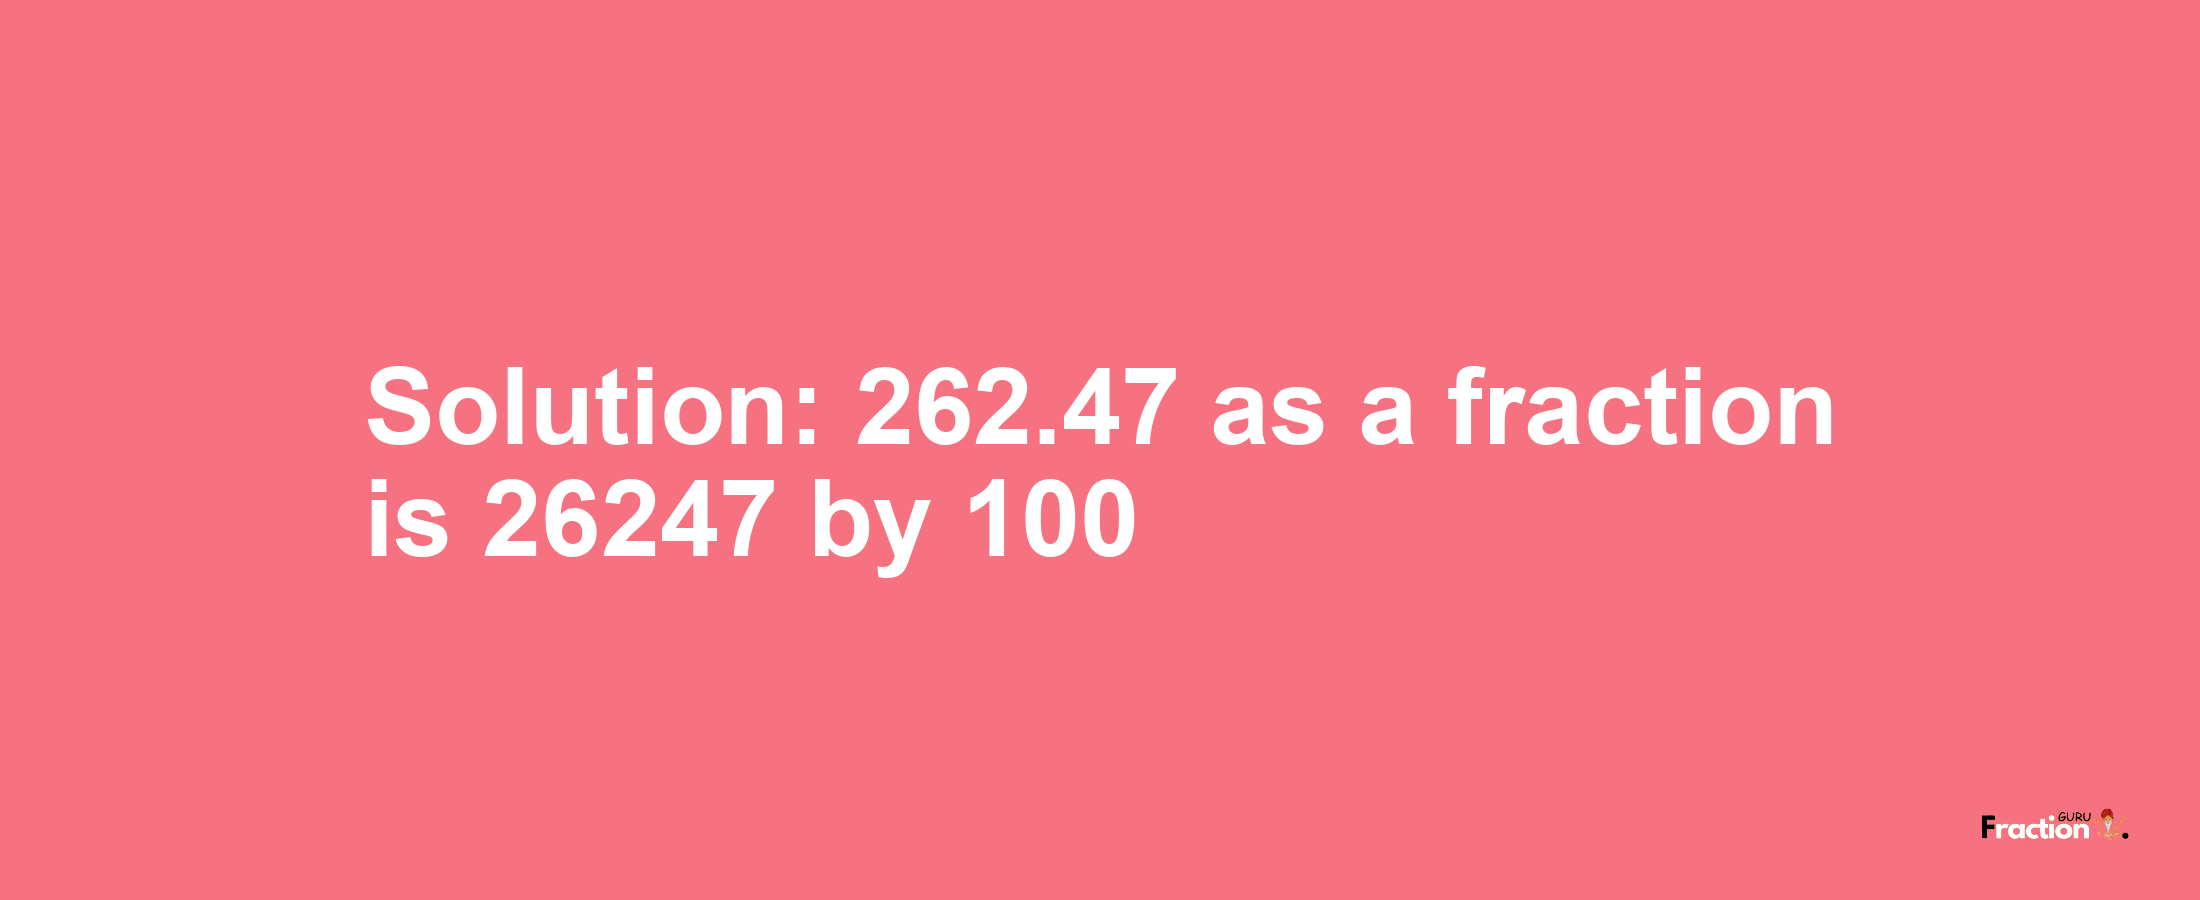 Solution:262.47 as a fraction is 26247/100